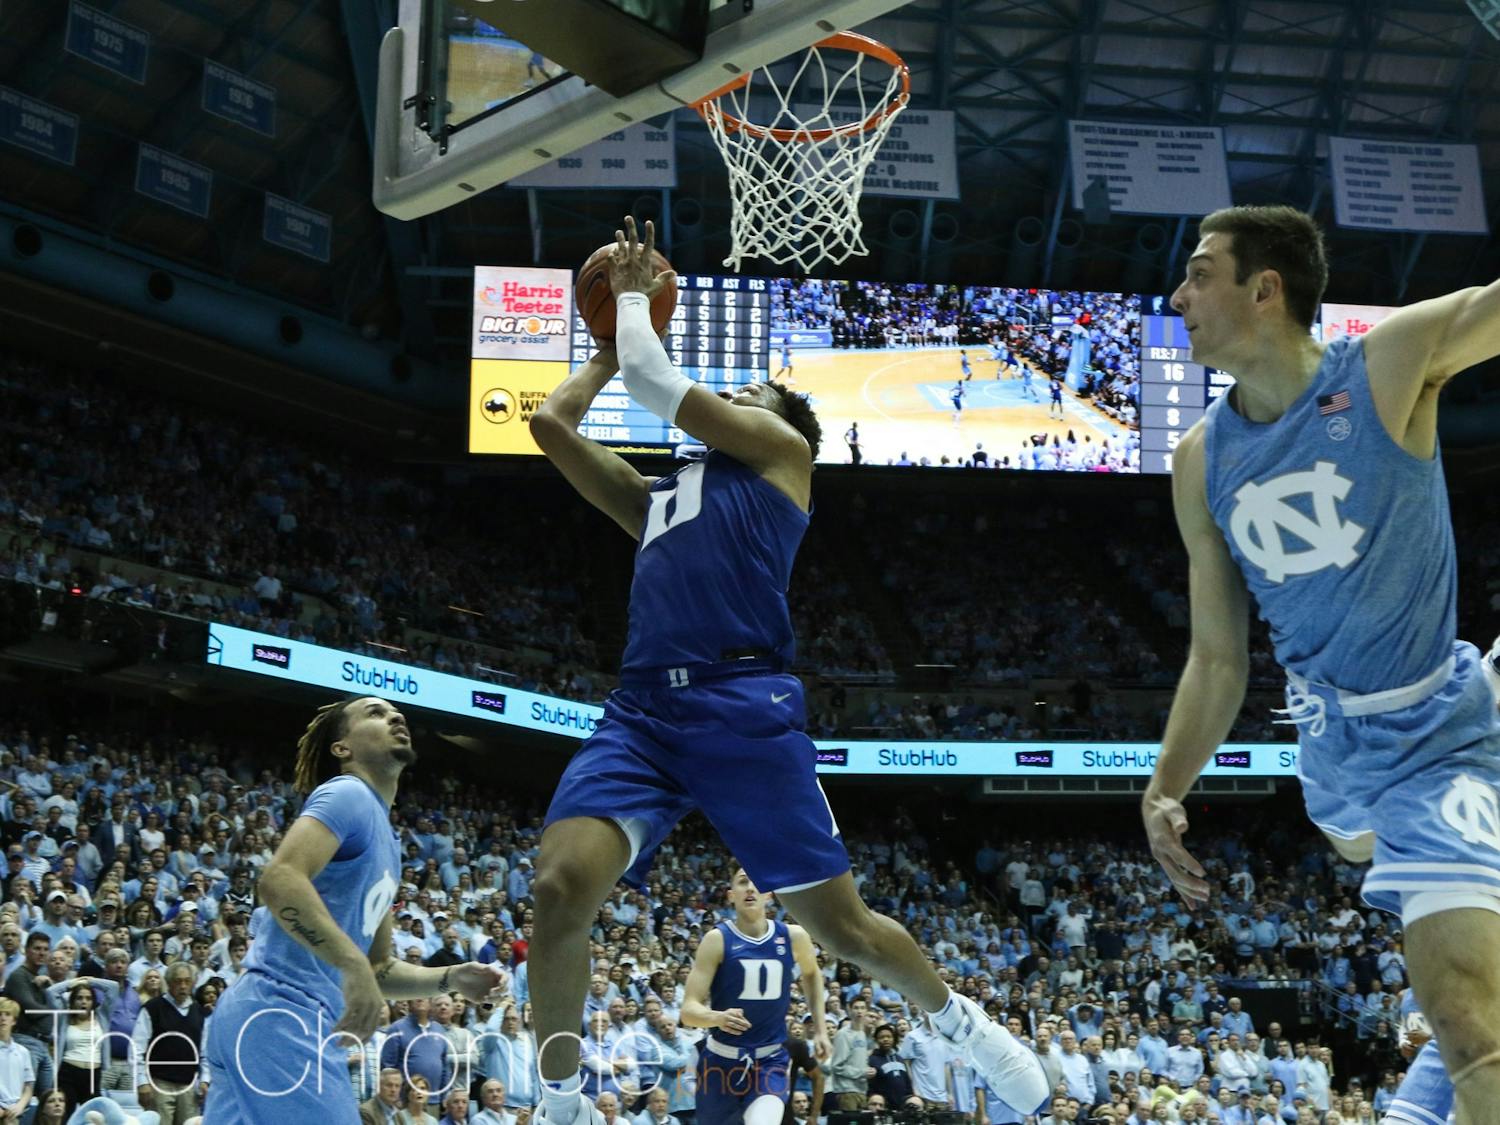 Freshman forward Wendell Moore Jr. provided the final, buzzer-beating blow to down the Tar Heels Saturday.